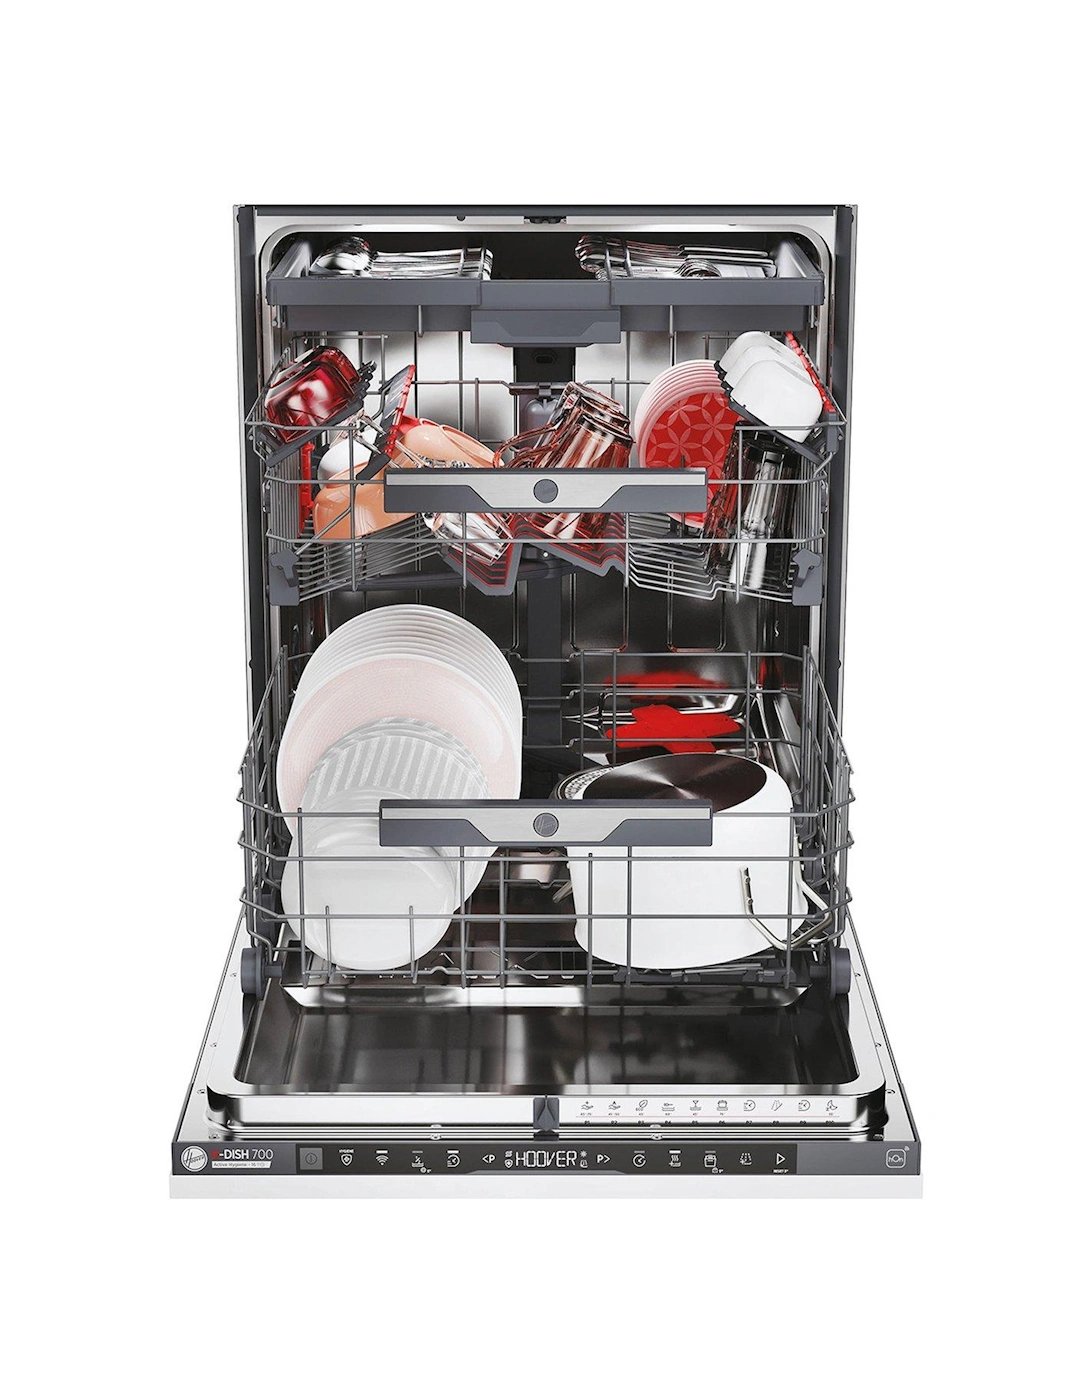 HI6B2F1PTS-80, 60cm Dishwasher, 16 place settings, B energy, WIFI - Stainless Steel, 2 of 1